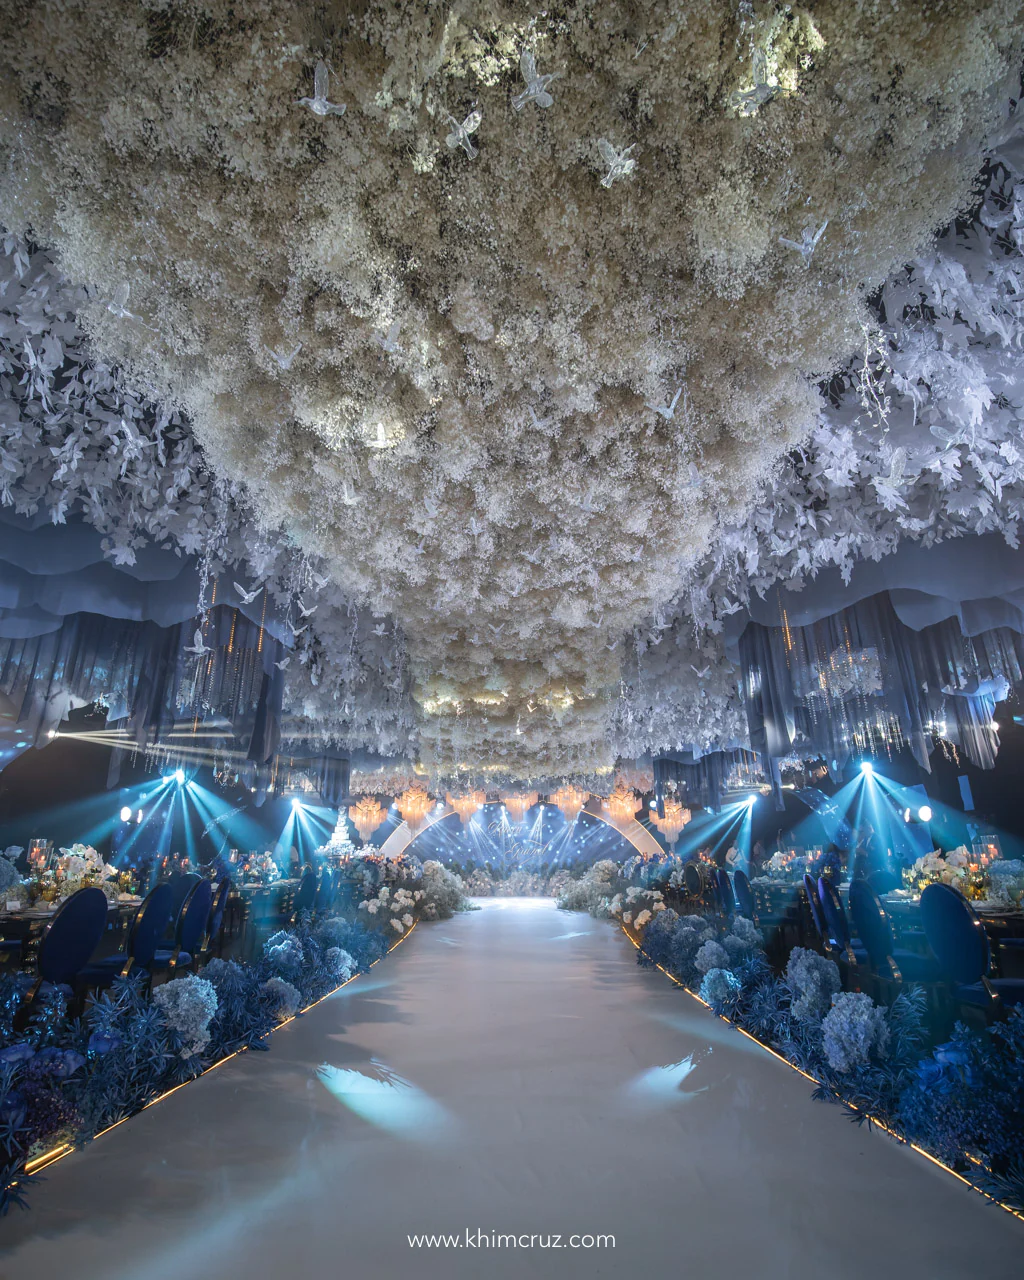 48 feet Gypsophilas hanged with crystals and birds as ceiling installation above cascading blue floral walkway designed by Khim Cruz